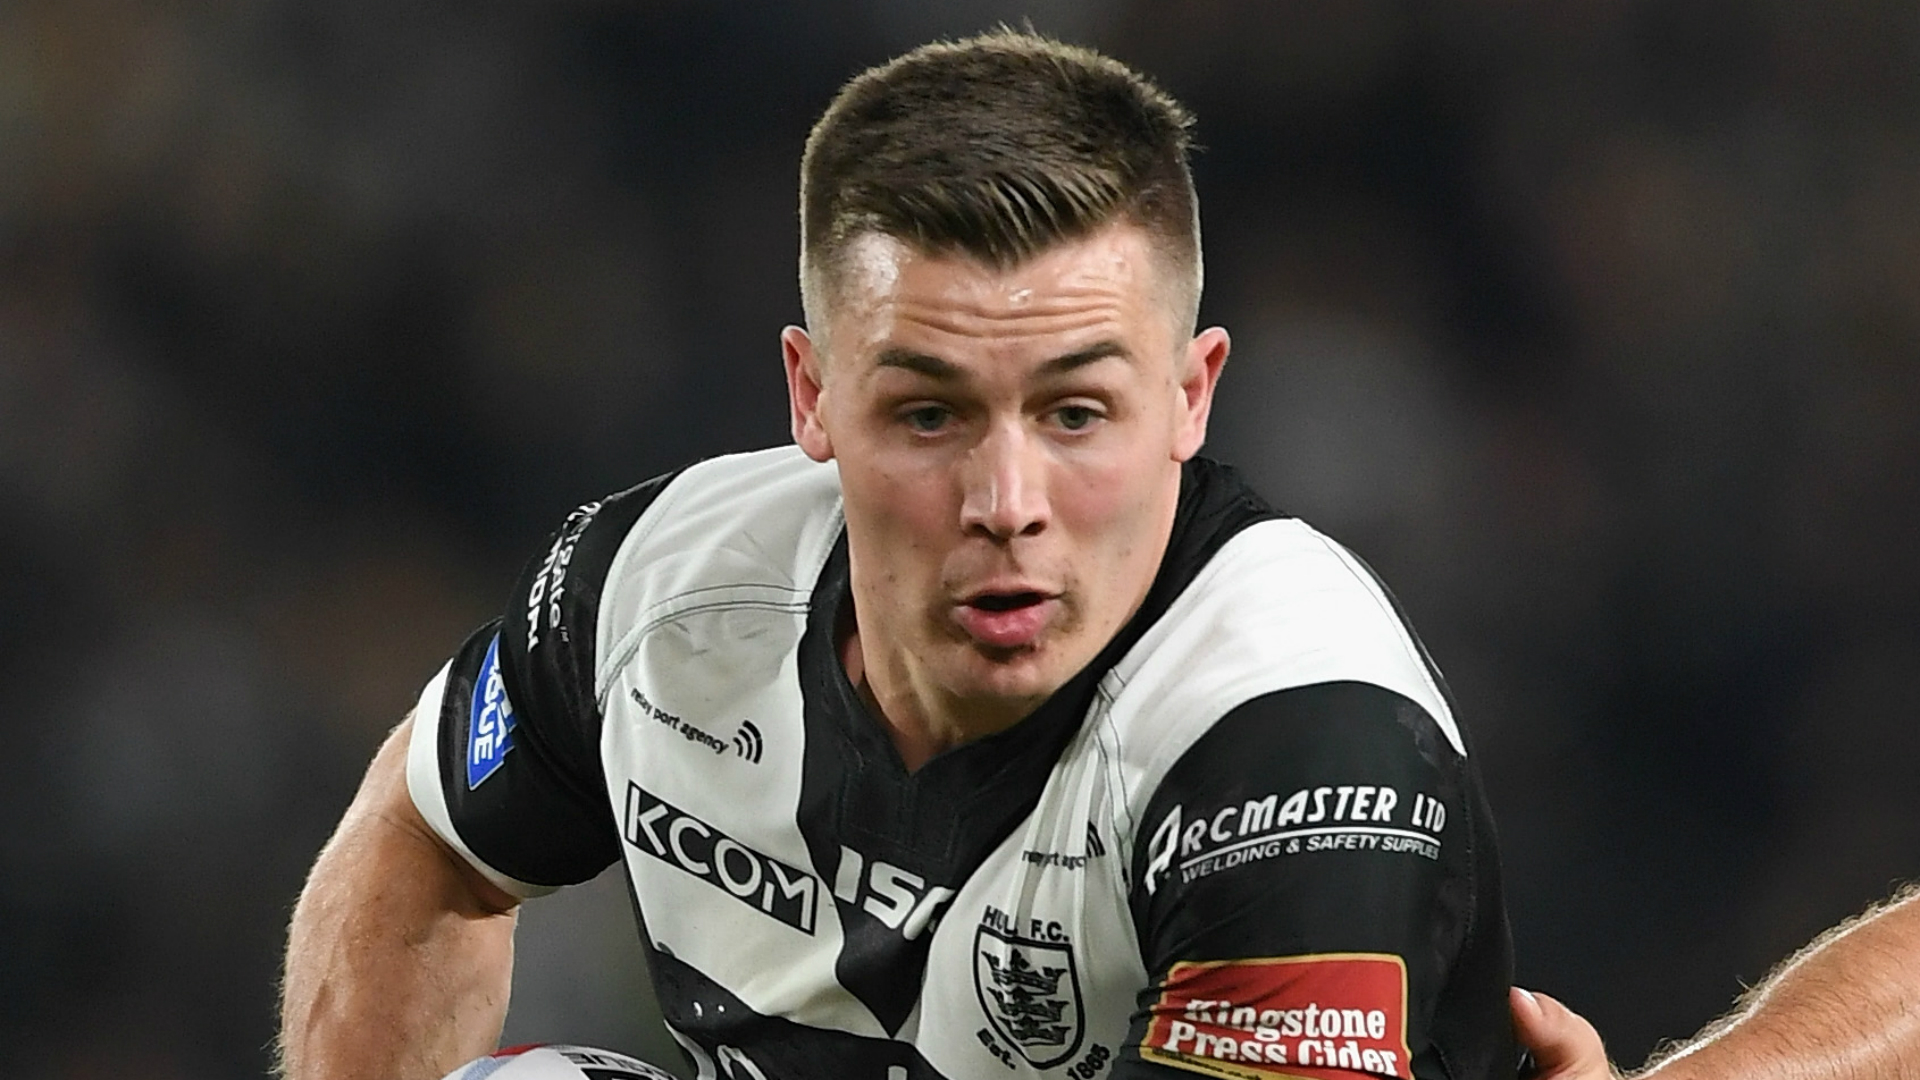 Hull FC clinched their seventh consecutive derby victory over Hull KR, while there were wins for Catalans Dragons and Huddersfield Giants.